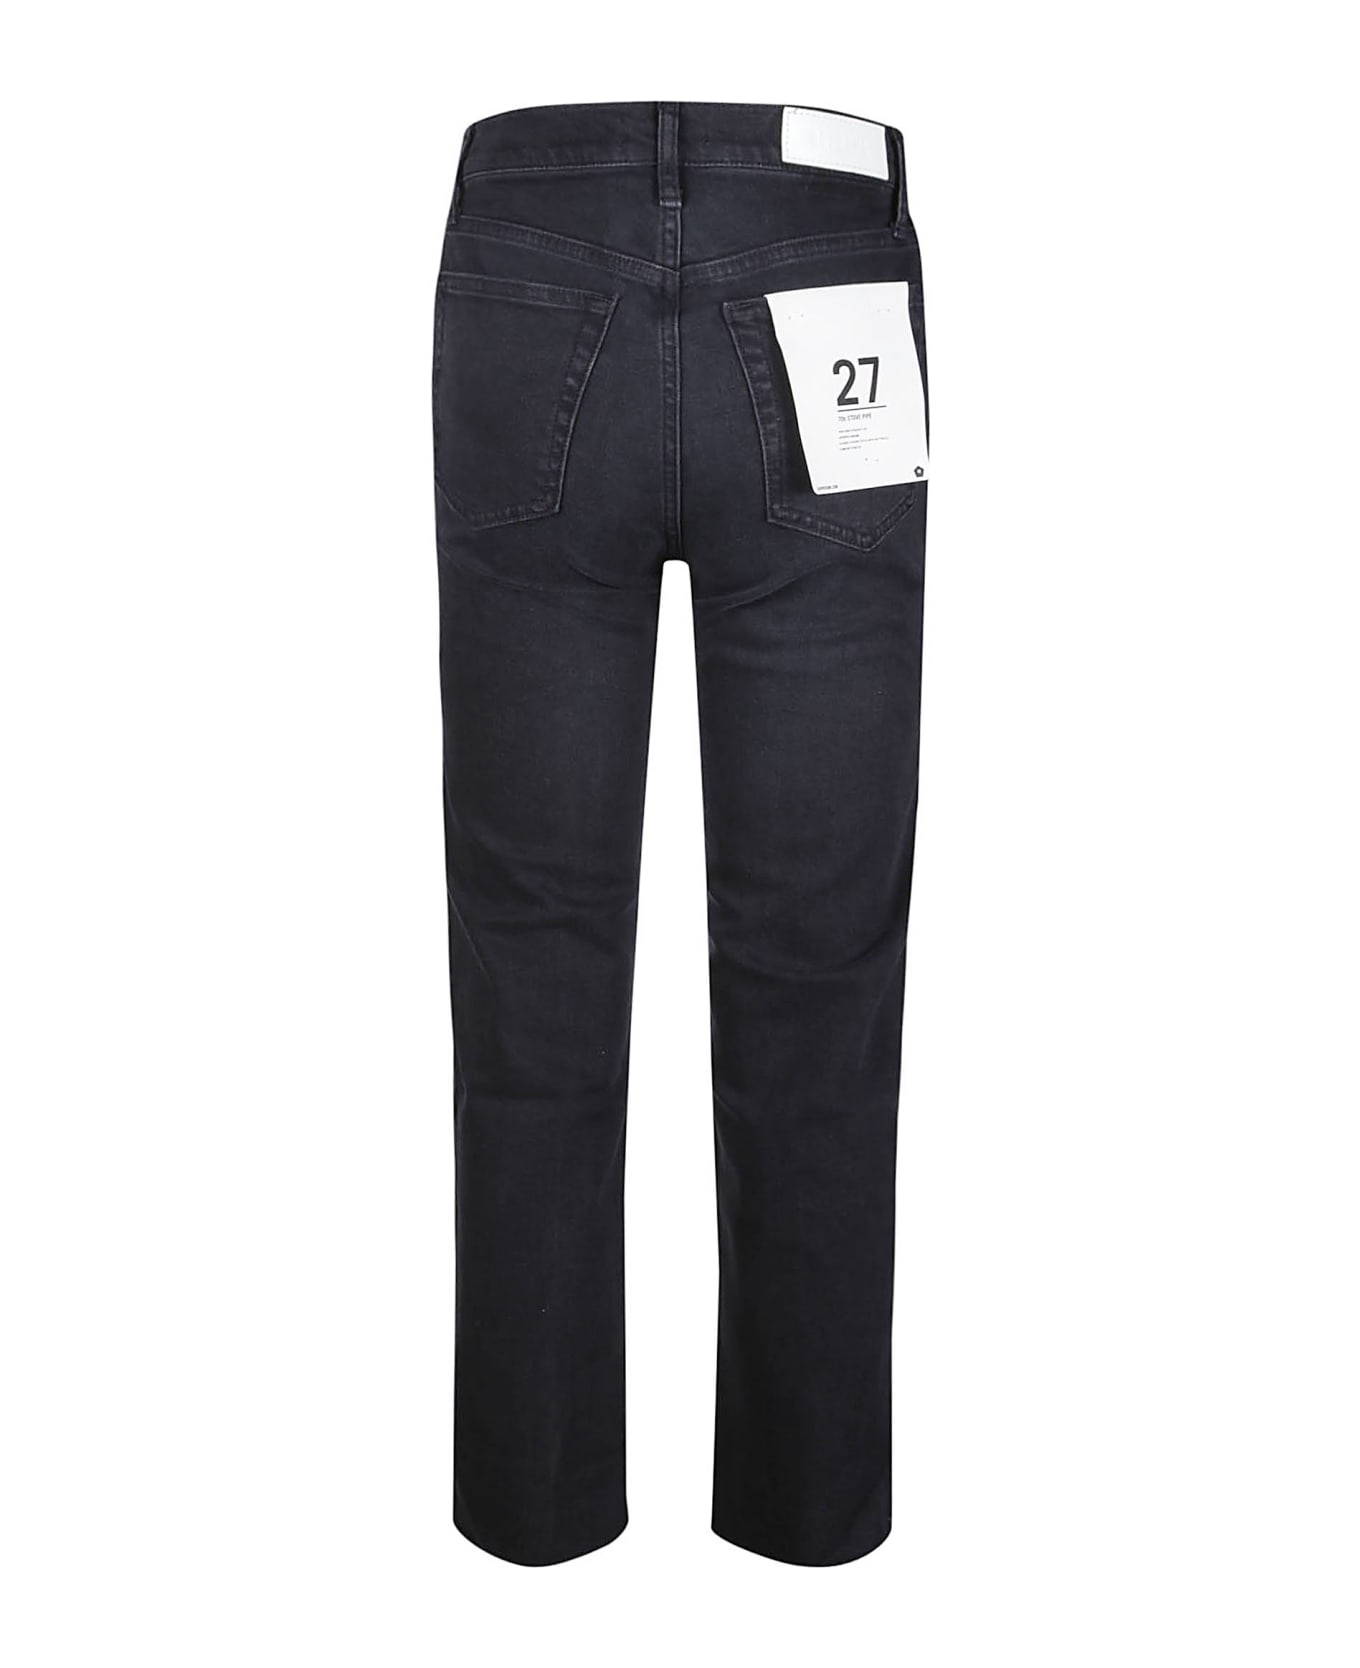 RE/DONE 70s Stove Pipe Jeans - Faded Black